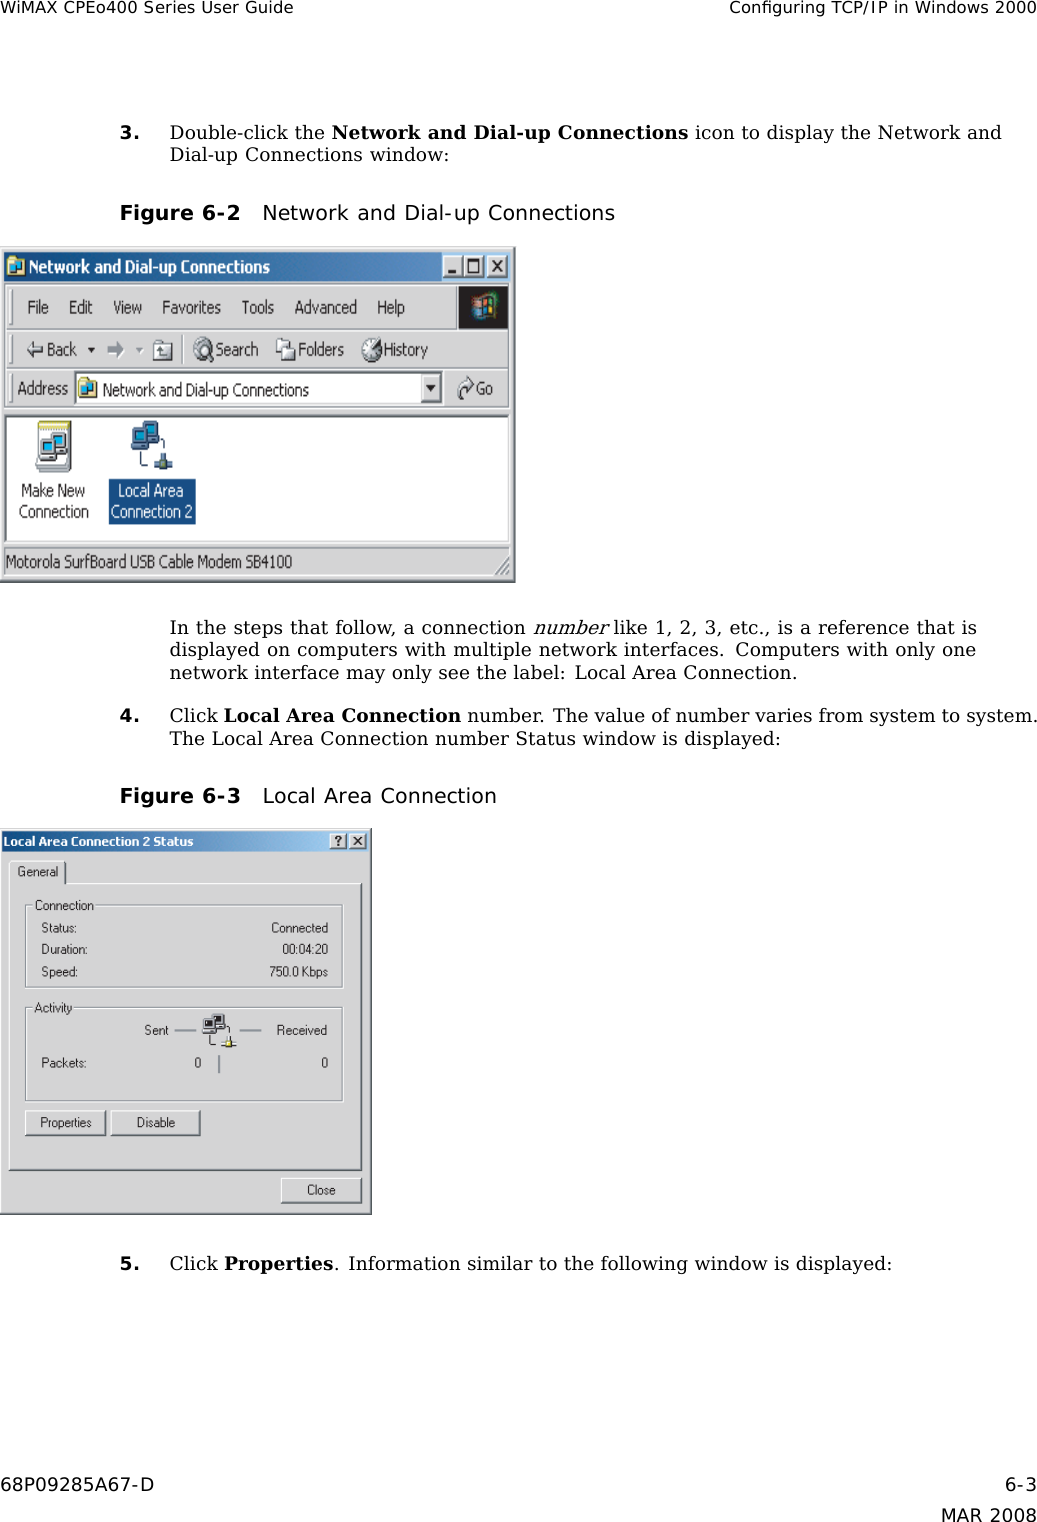 WiMAX CPEo400 Series User Guide Conﬁguring TCP/IP in Windows 20003. Double-click the Network and Dial-up Connections icon to display the Network andDial-up Connections window:Figure 6-2 Network and Dial-up ConnectionsIn the steps that follow, a connectionnumberlike 1, 2, 3, etc., is a reference that isdisplayed on computers with multiple network interfaces. Computers with only onenetwork interface may only see the label: Local Area Connection.4. Click Local Area Connection number. The value of number varies from system to system.The Local Area Connection number Status window is displayed:Figure 6-3 Local Area Connection5. Click Properties. Information similar to the following window is displayed:68P09285A67-D 6-3MAR 2008